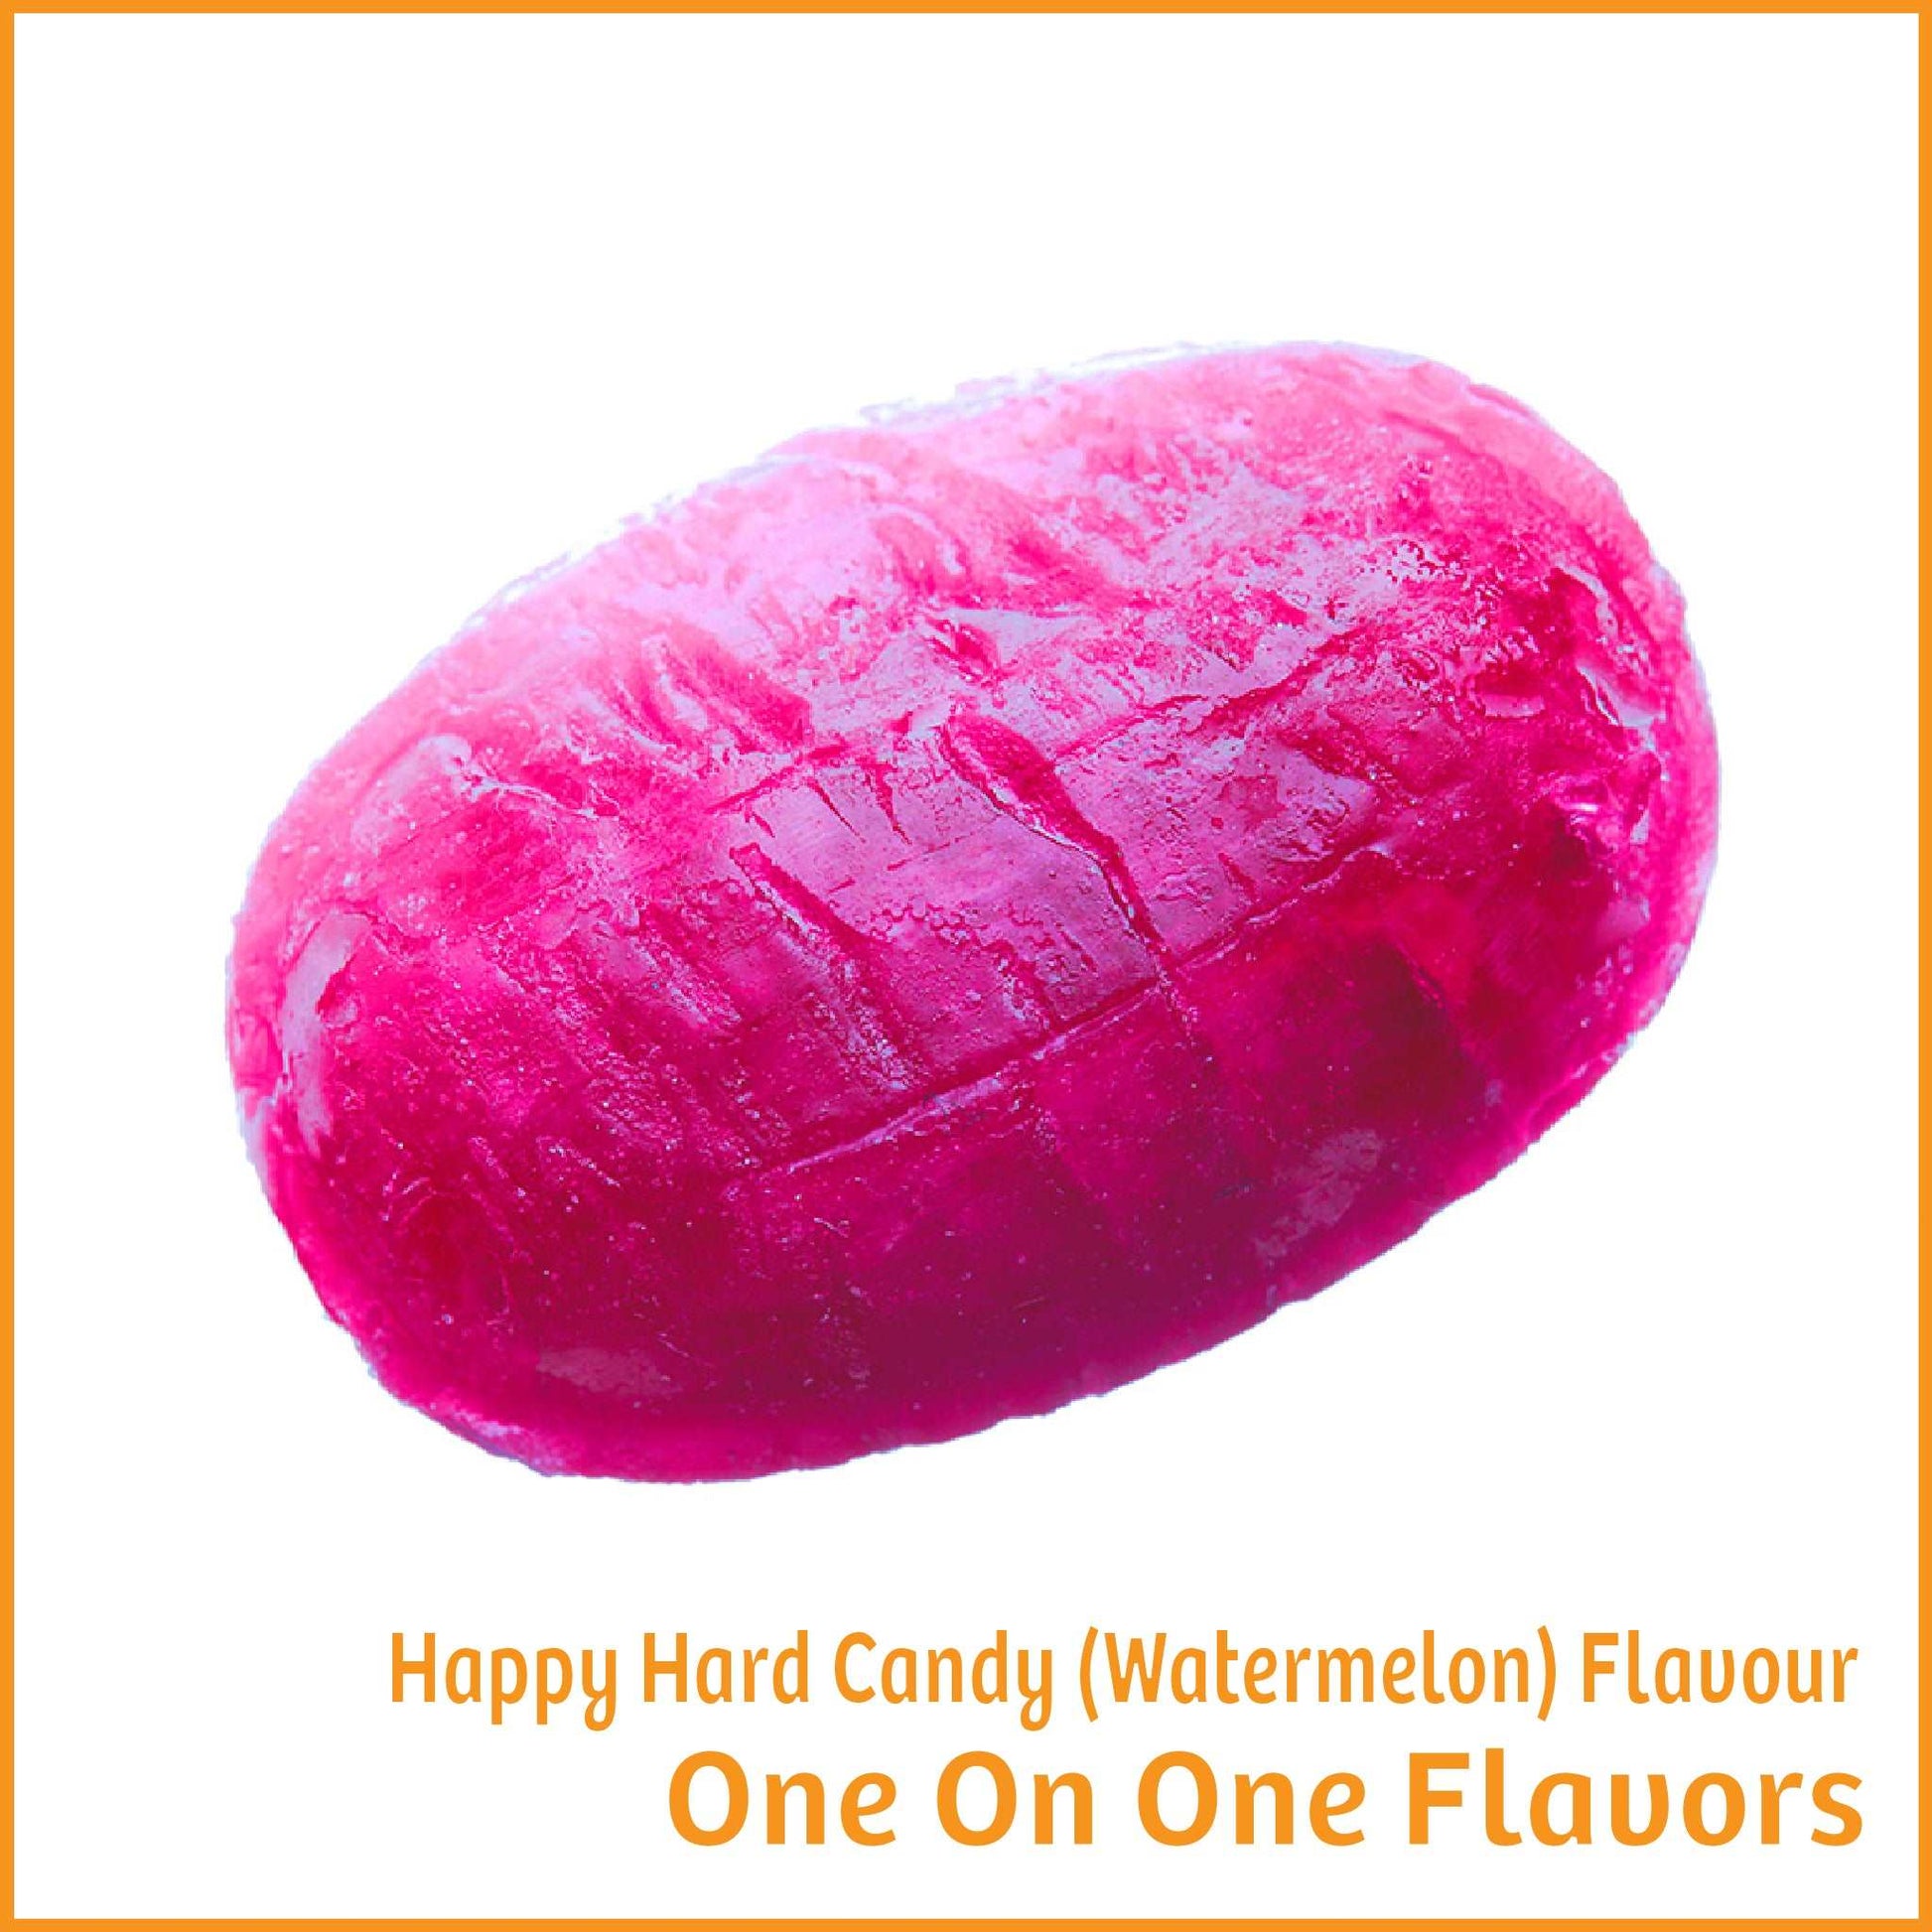 Happy Hard Candy (Watermelon) Flavour- One On One Flavors - Flavour Fog - Canada's flavour depot.